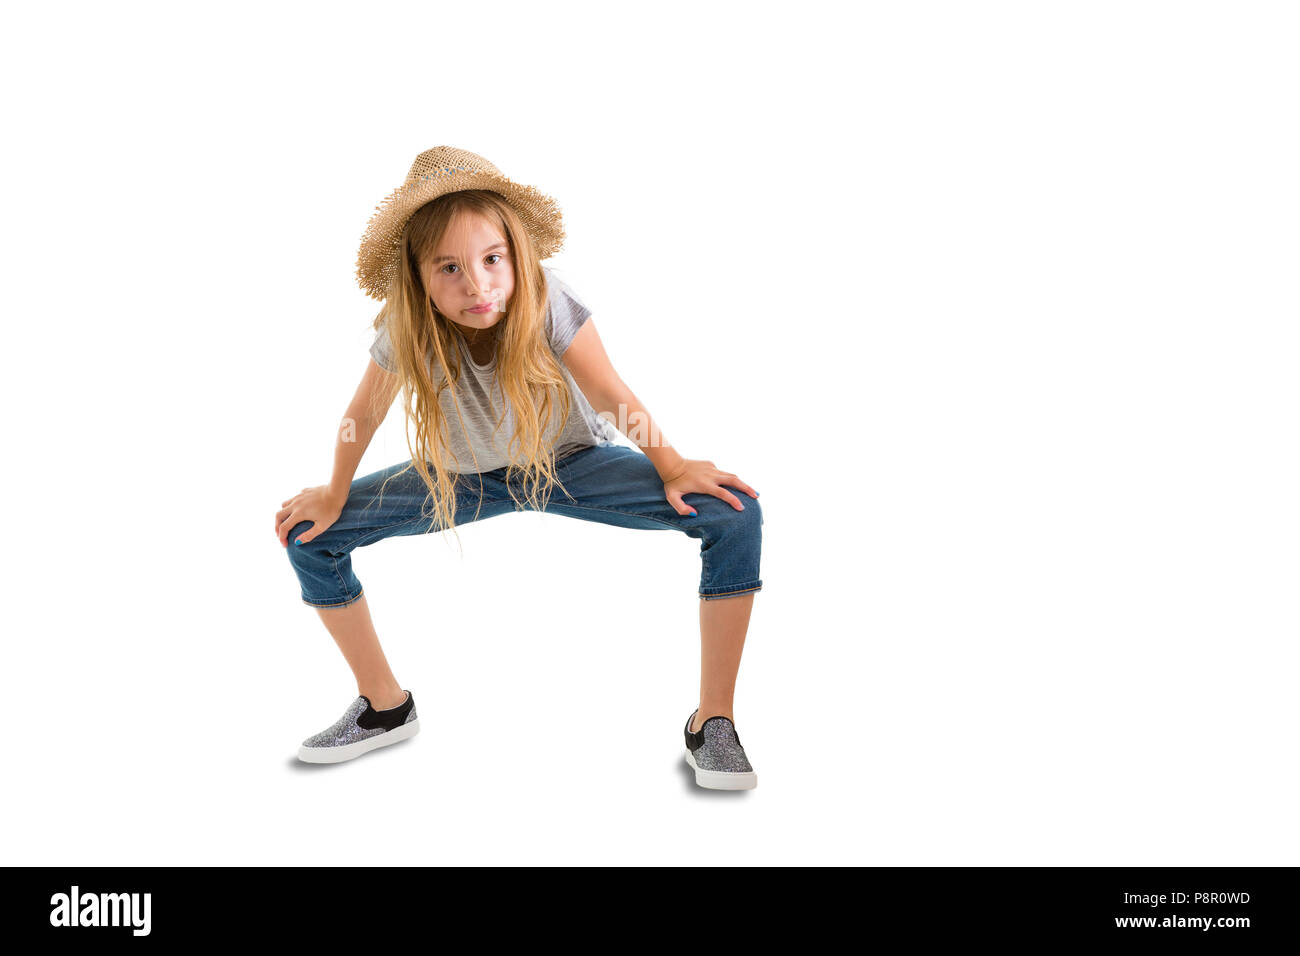 Cute thin young girl in a trendy straw hat and denim jeans crouching down looking at the camera isolated on white with copy space Stock Photo